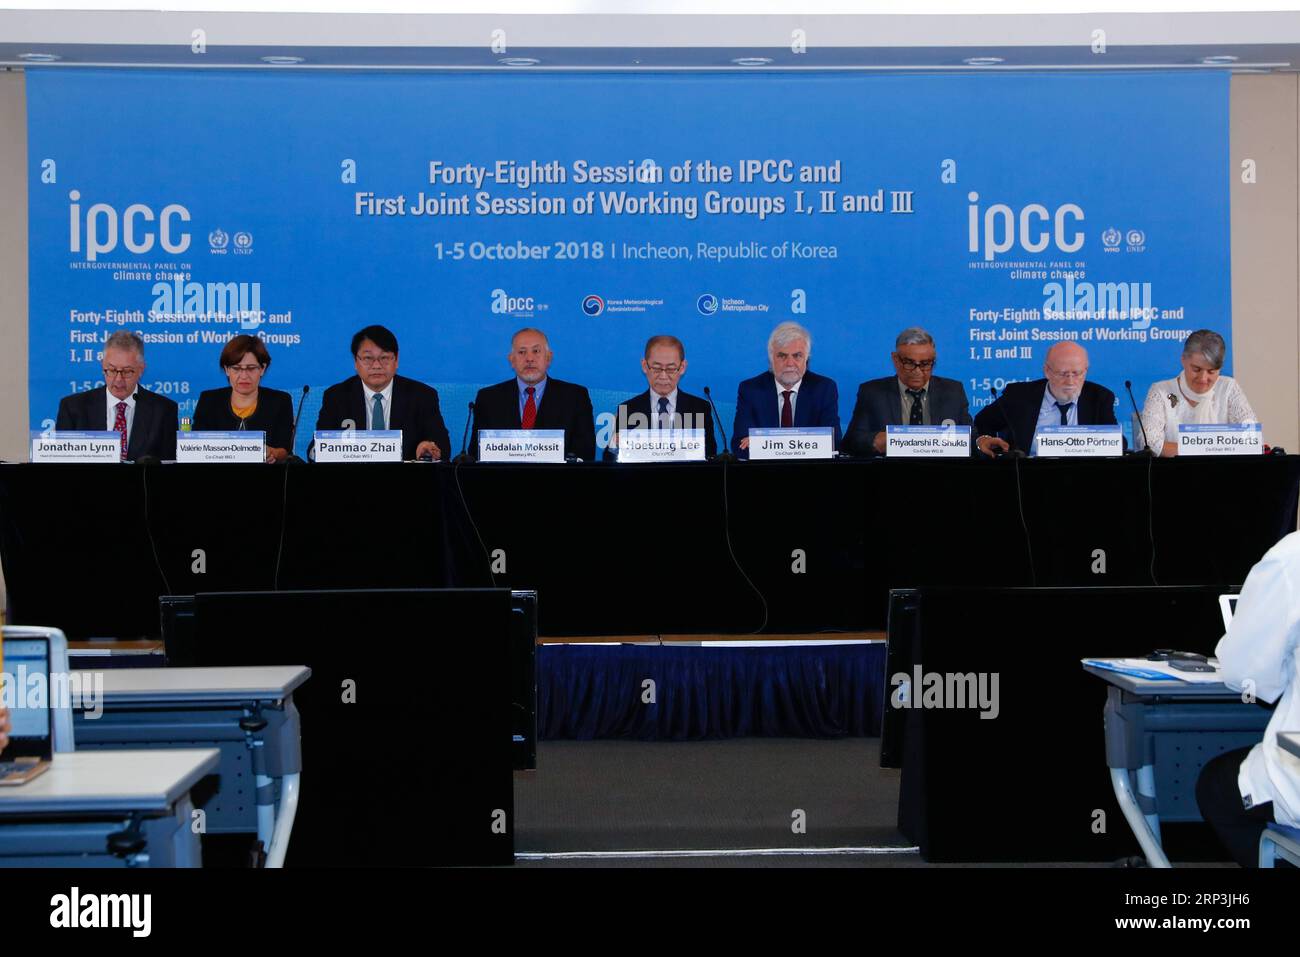 (181008) -- INCHEON, Oct. 8, 2018 -- A press conference of the 48th seesion of the Intergovernmental Panel on Climate Change (IPCC) is held in South Korea s western port city of Incheon, Oct. 8, 2018. The IPCC, an international body assessing the science related to climate change, on Monday urged rapid and far-reaching changes in all aspects of the entire world to fight against global warming after adopting a special report on global warming. ) (cl) SOUTH KOREA-INCHEON-IPCC-REPORT WangxJingqiang PUBLICATIONxNOTxINxCHN Stock Photo